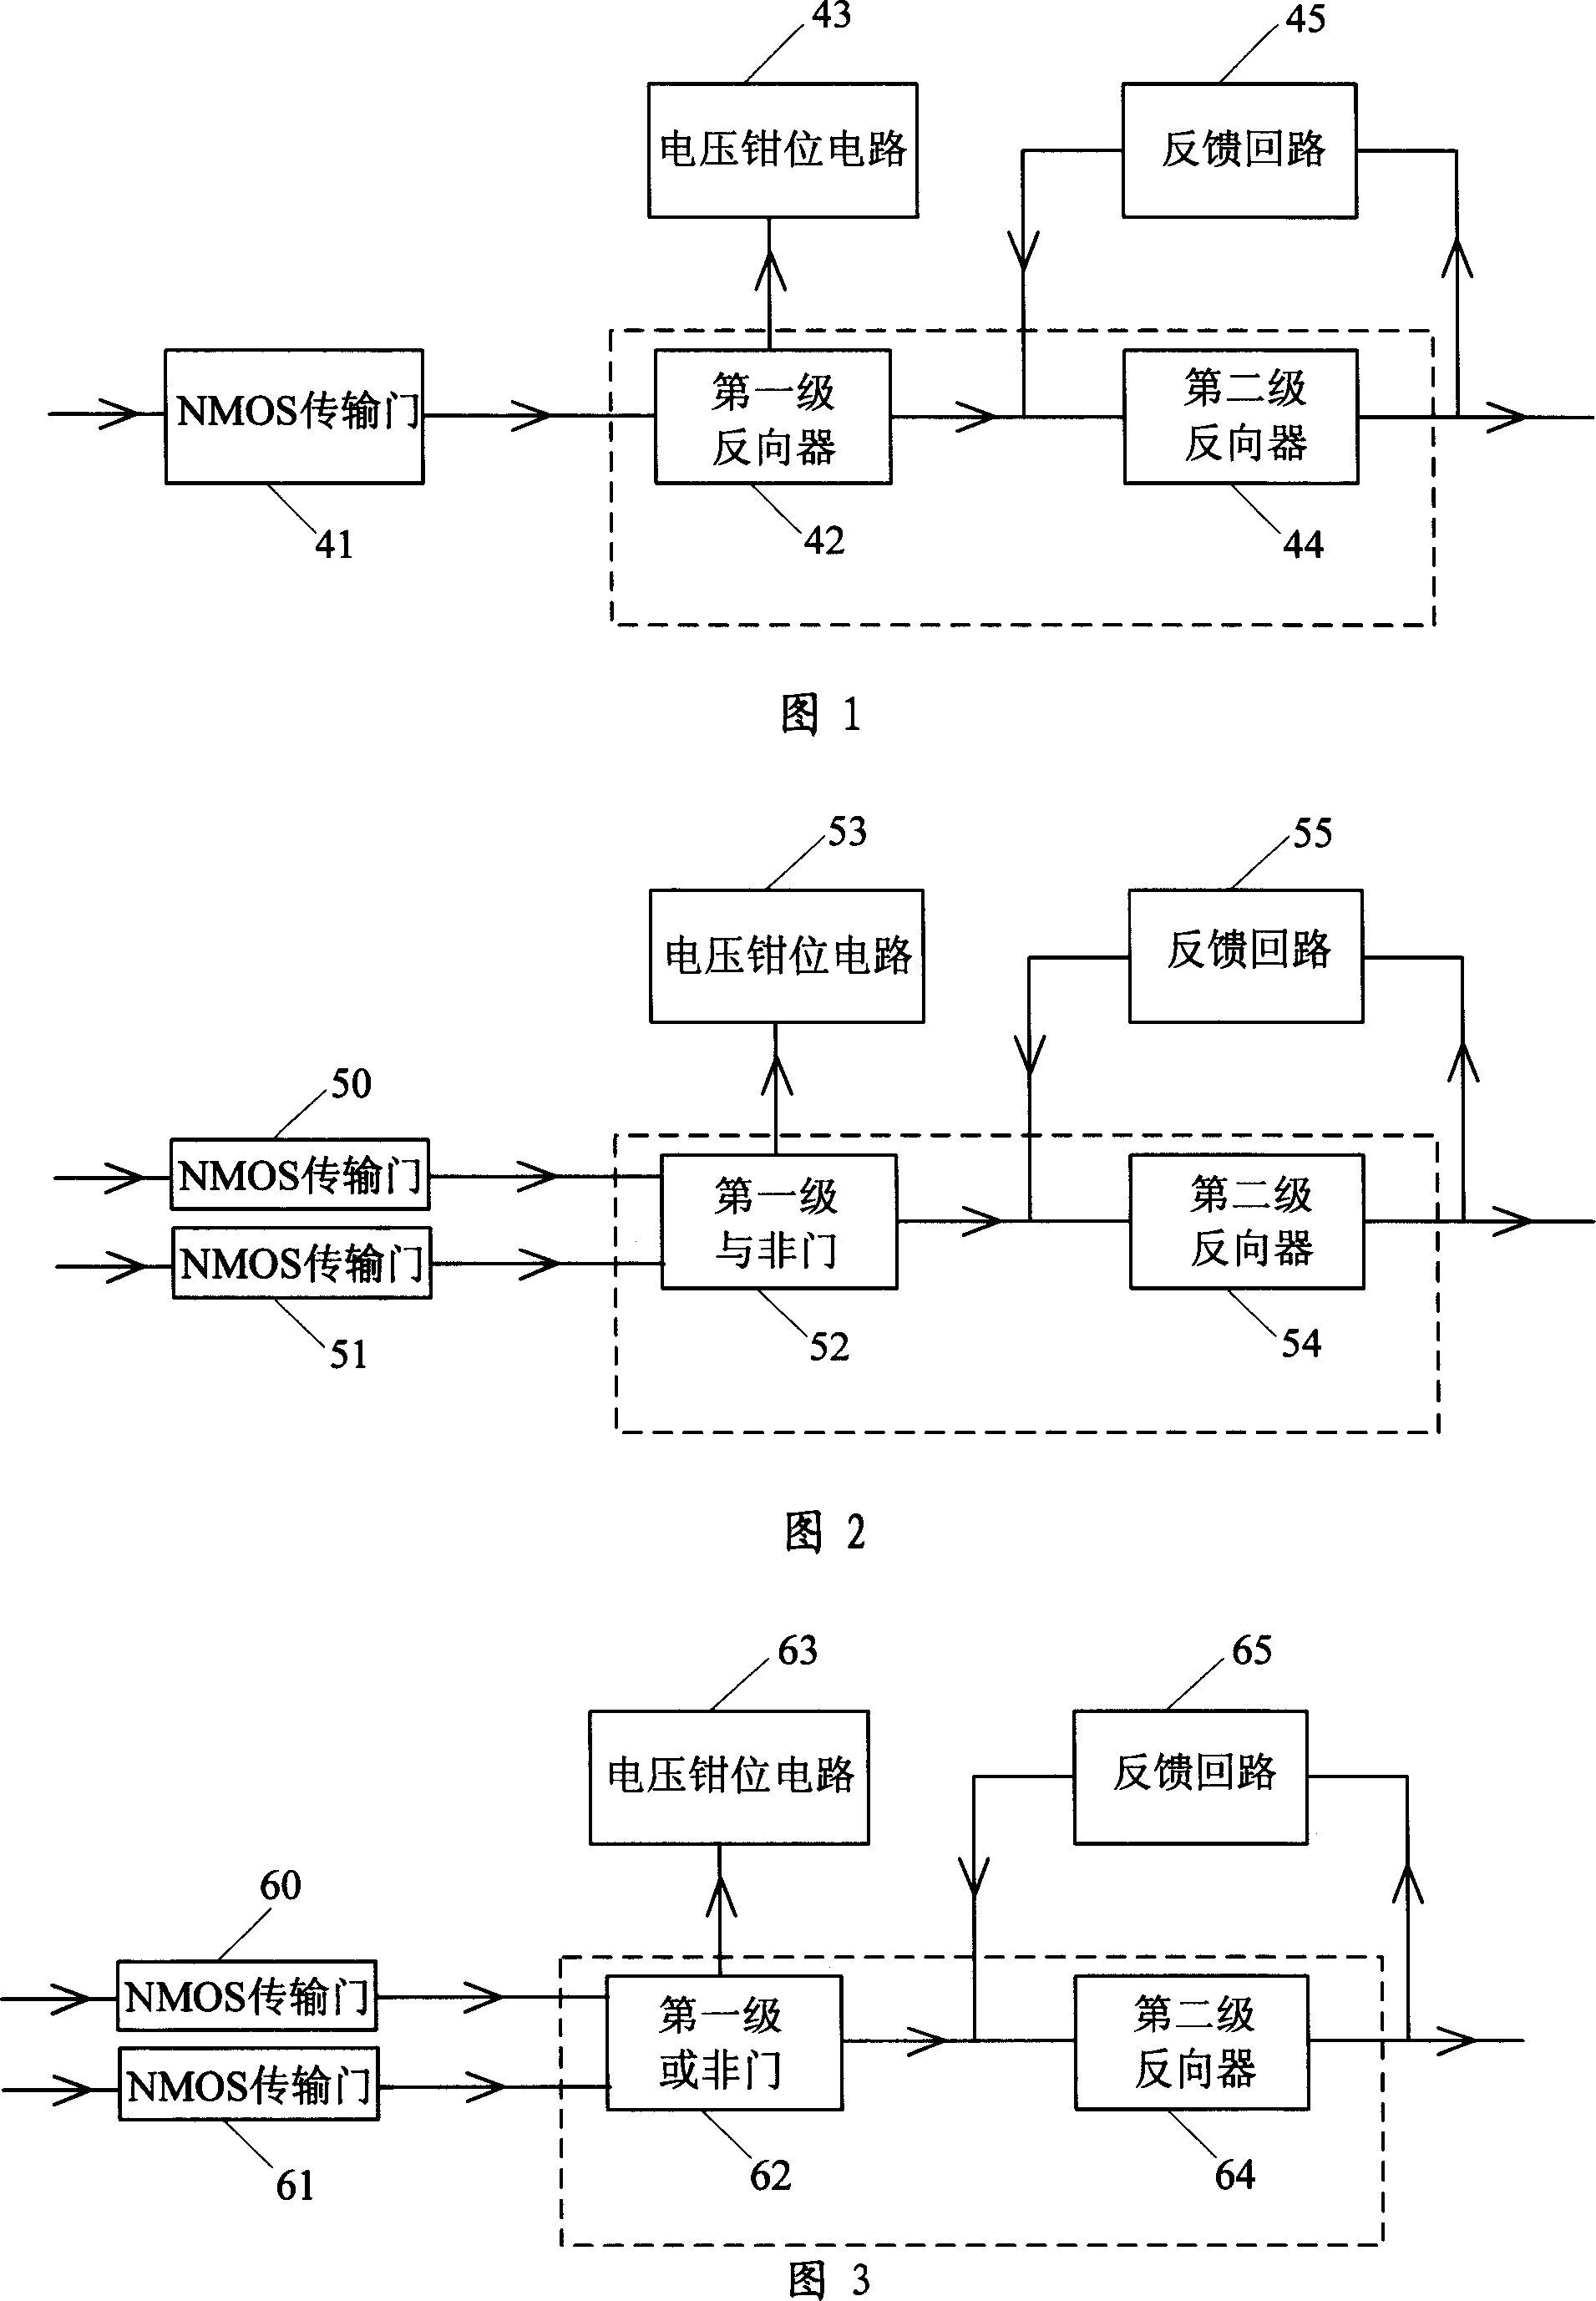 Circuit capable of eliminating NMOS single tube transmission to form static short circuit current